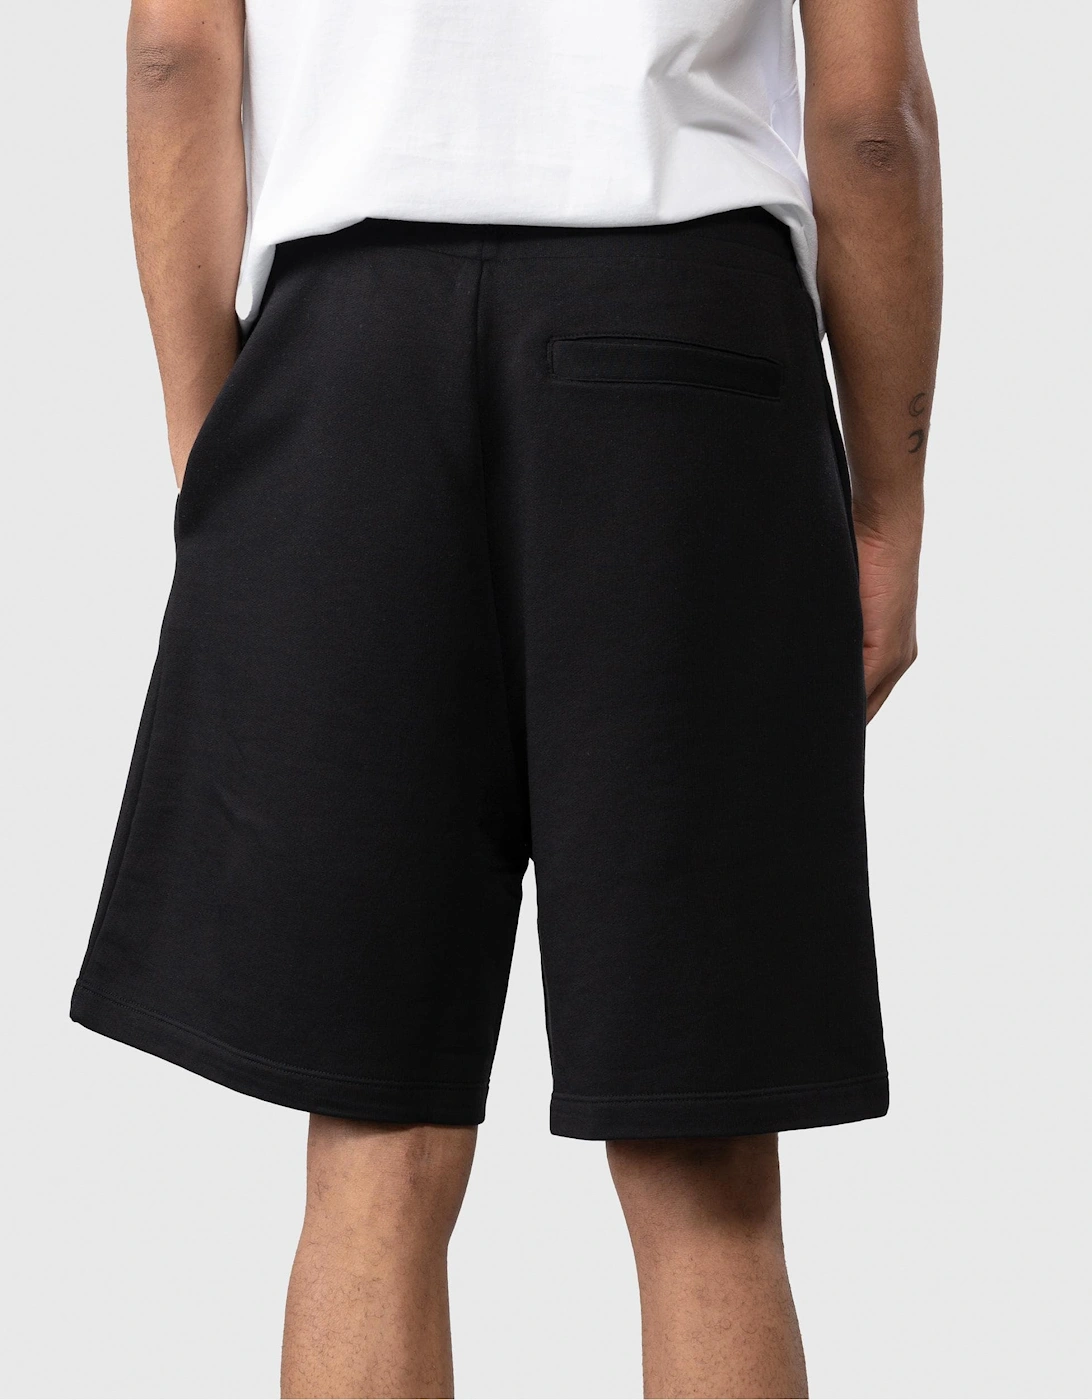 Unisex Drawstring Shorts With A|X Logo Patch